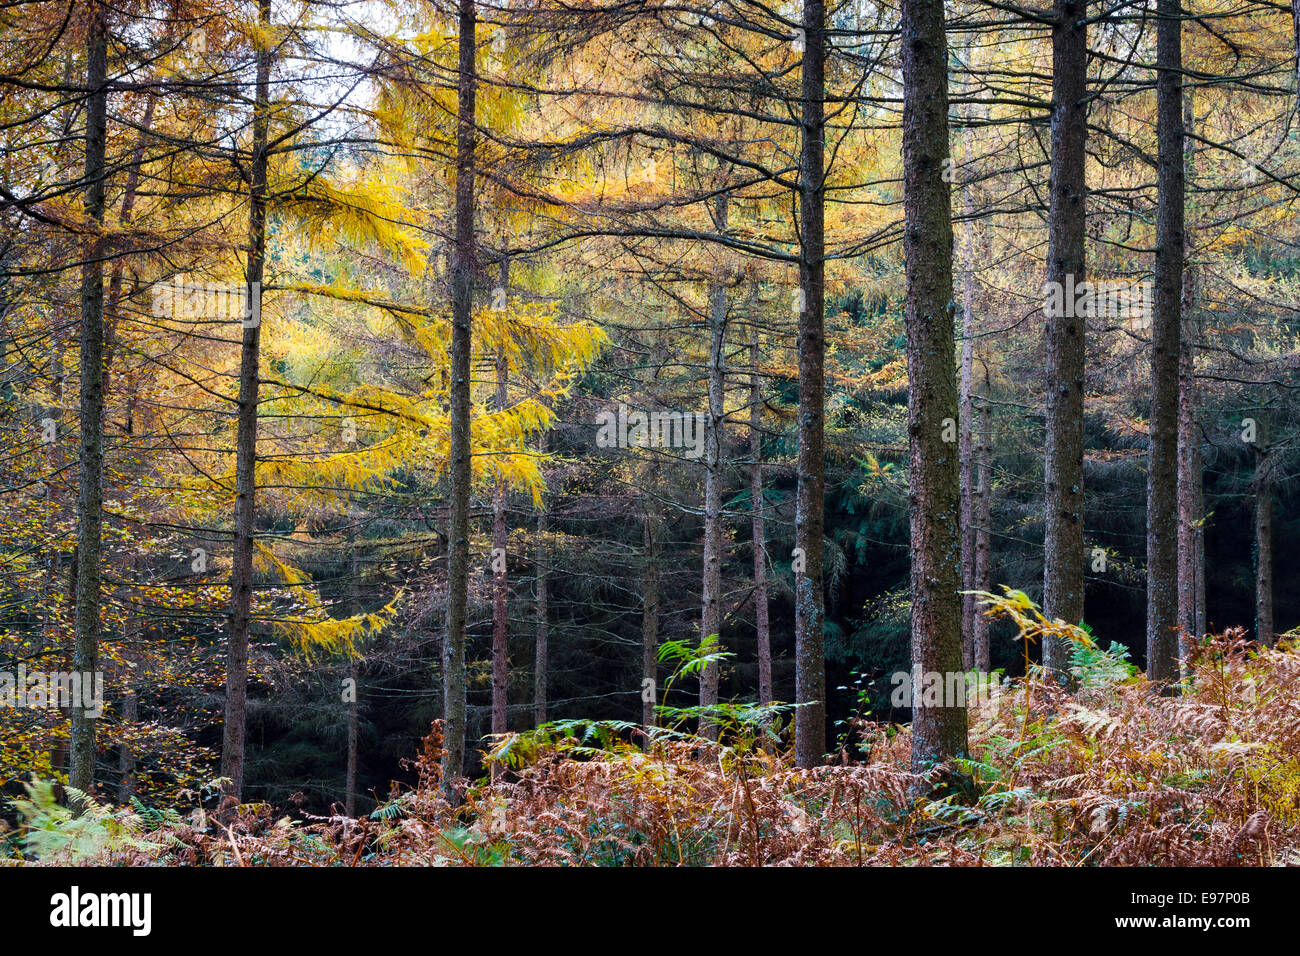 European larch (Larix decidua) forest in autumn. Gorbeia Natural Park. Biscay, Basque Country, Spain, Europe. Stock Photo